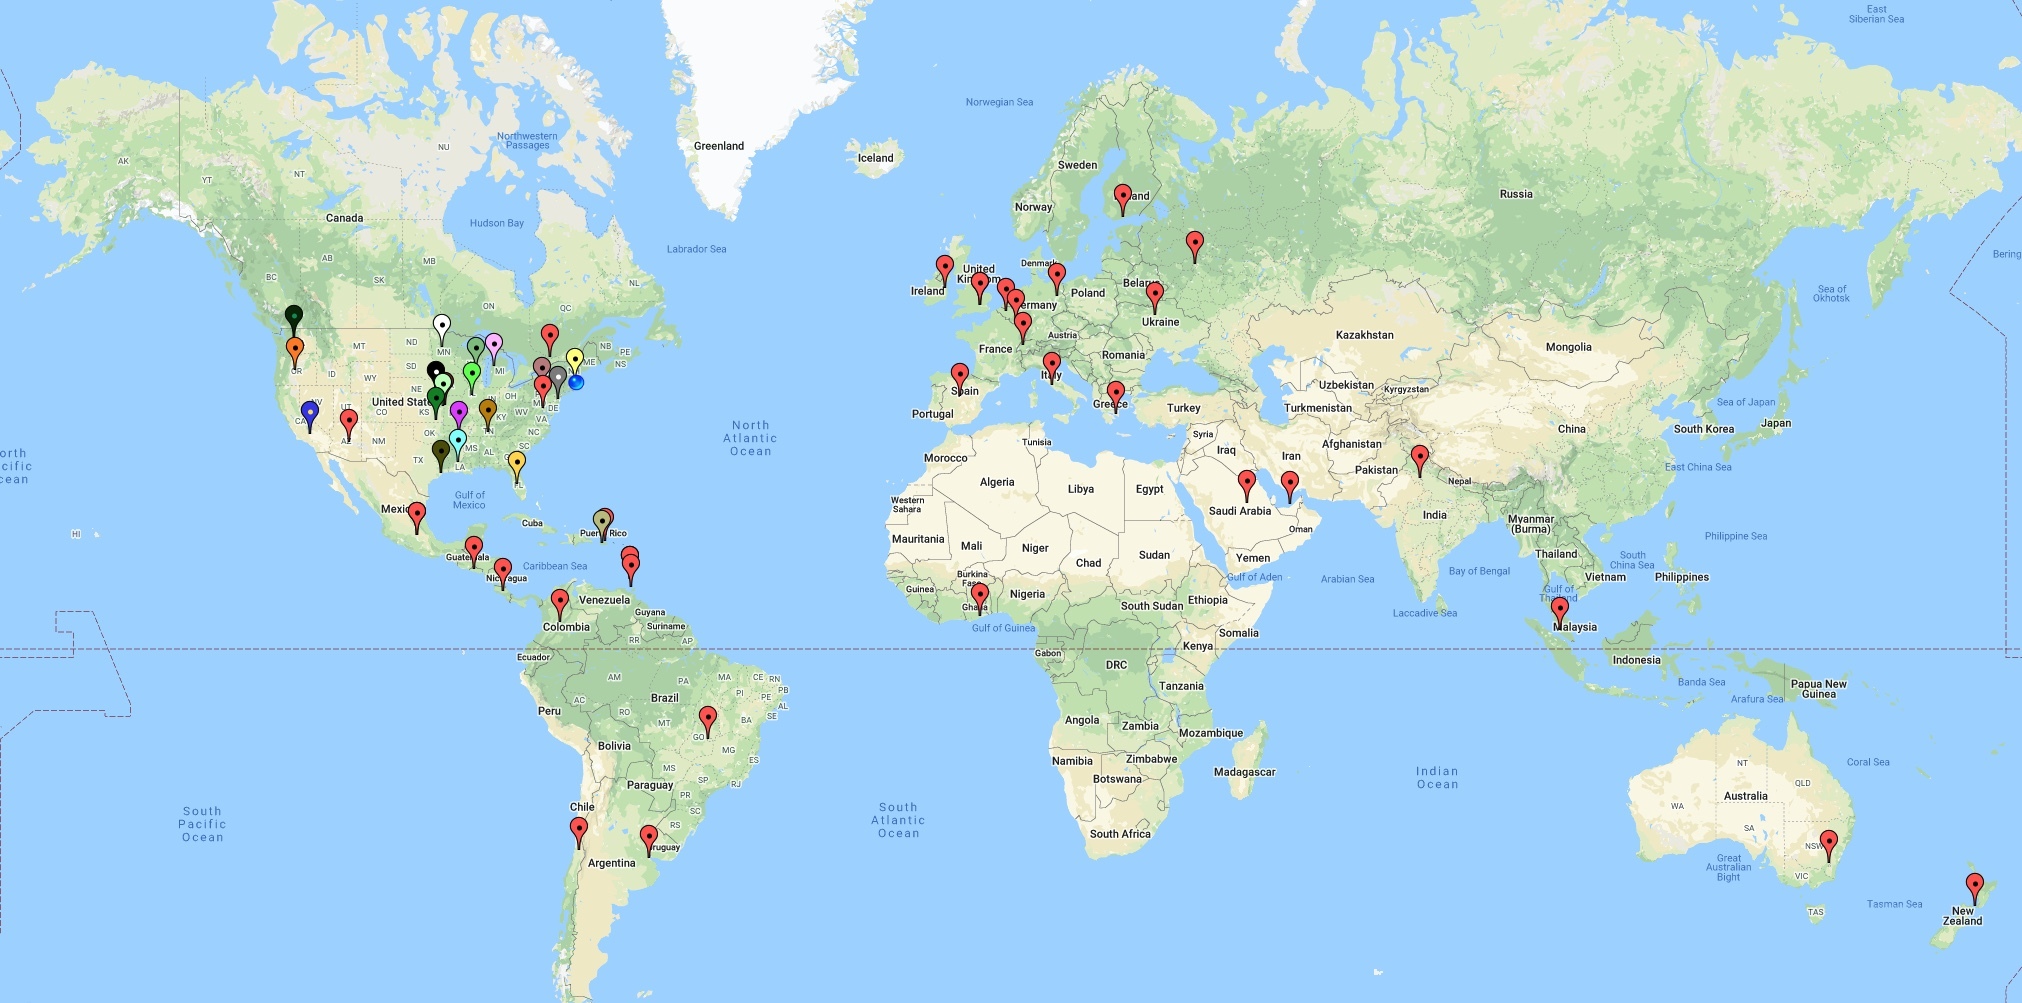 Customers from 31 countries have attended our virtual trainings so far